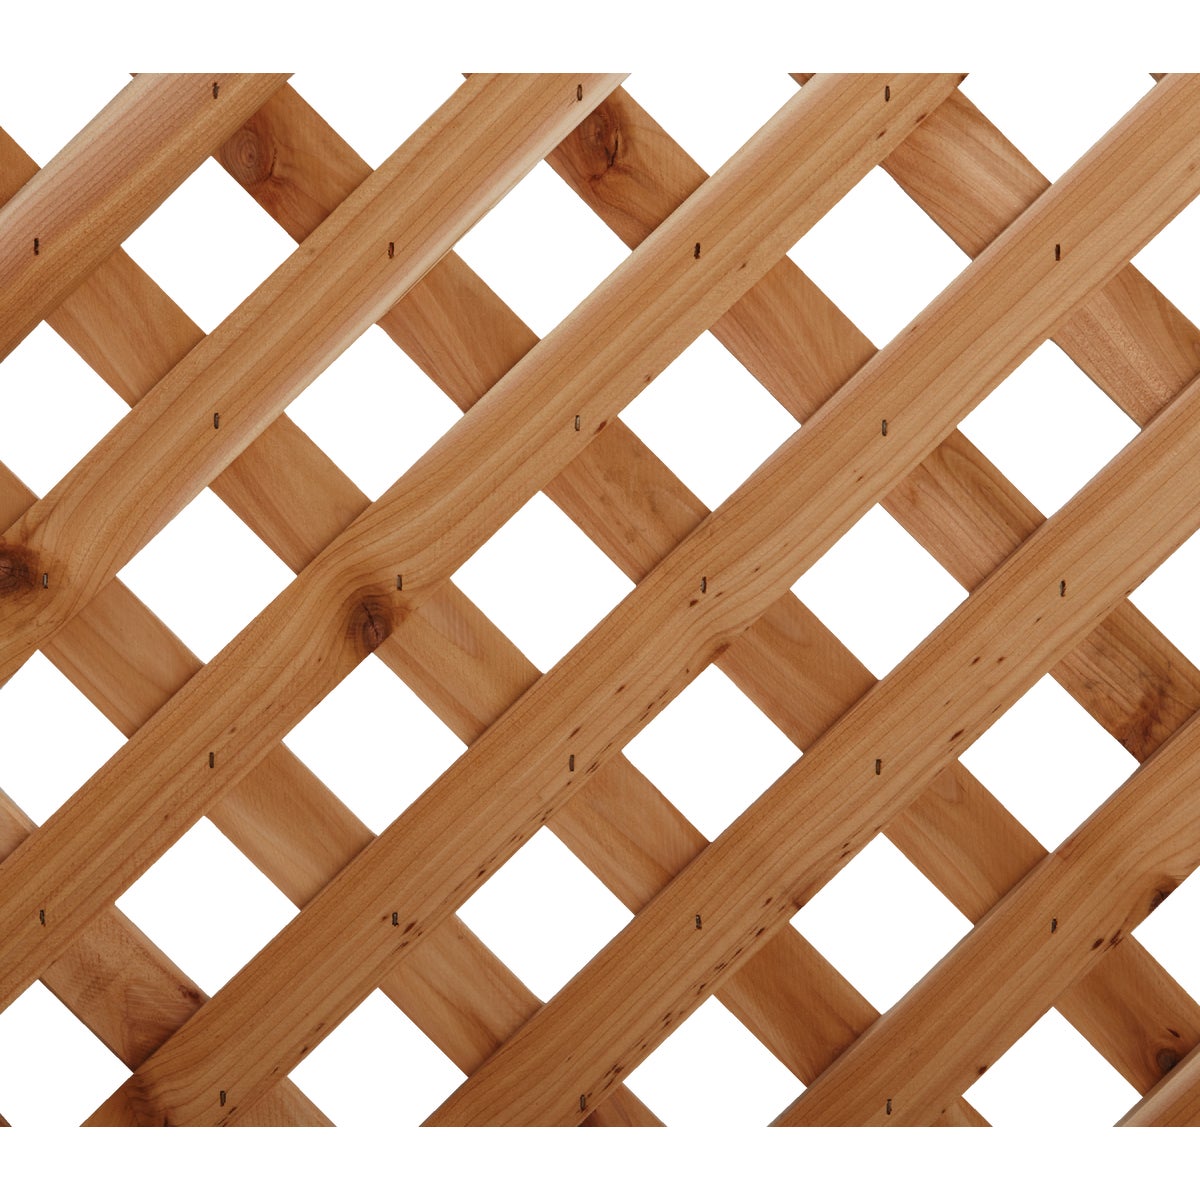 Real Wood Products 4 Ft. W. x 8 Ft. L. x 3/4 In. Thick Natural Cedar Privacy Diamond Lattice Panel